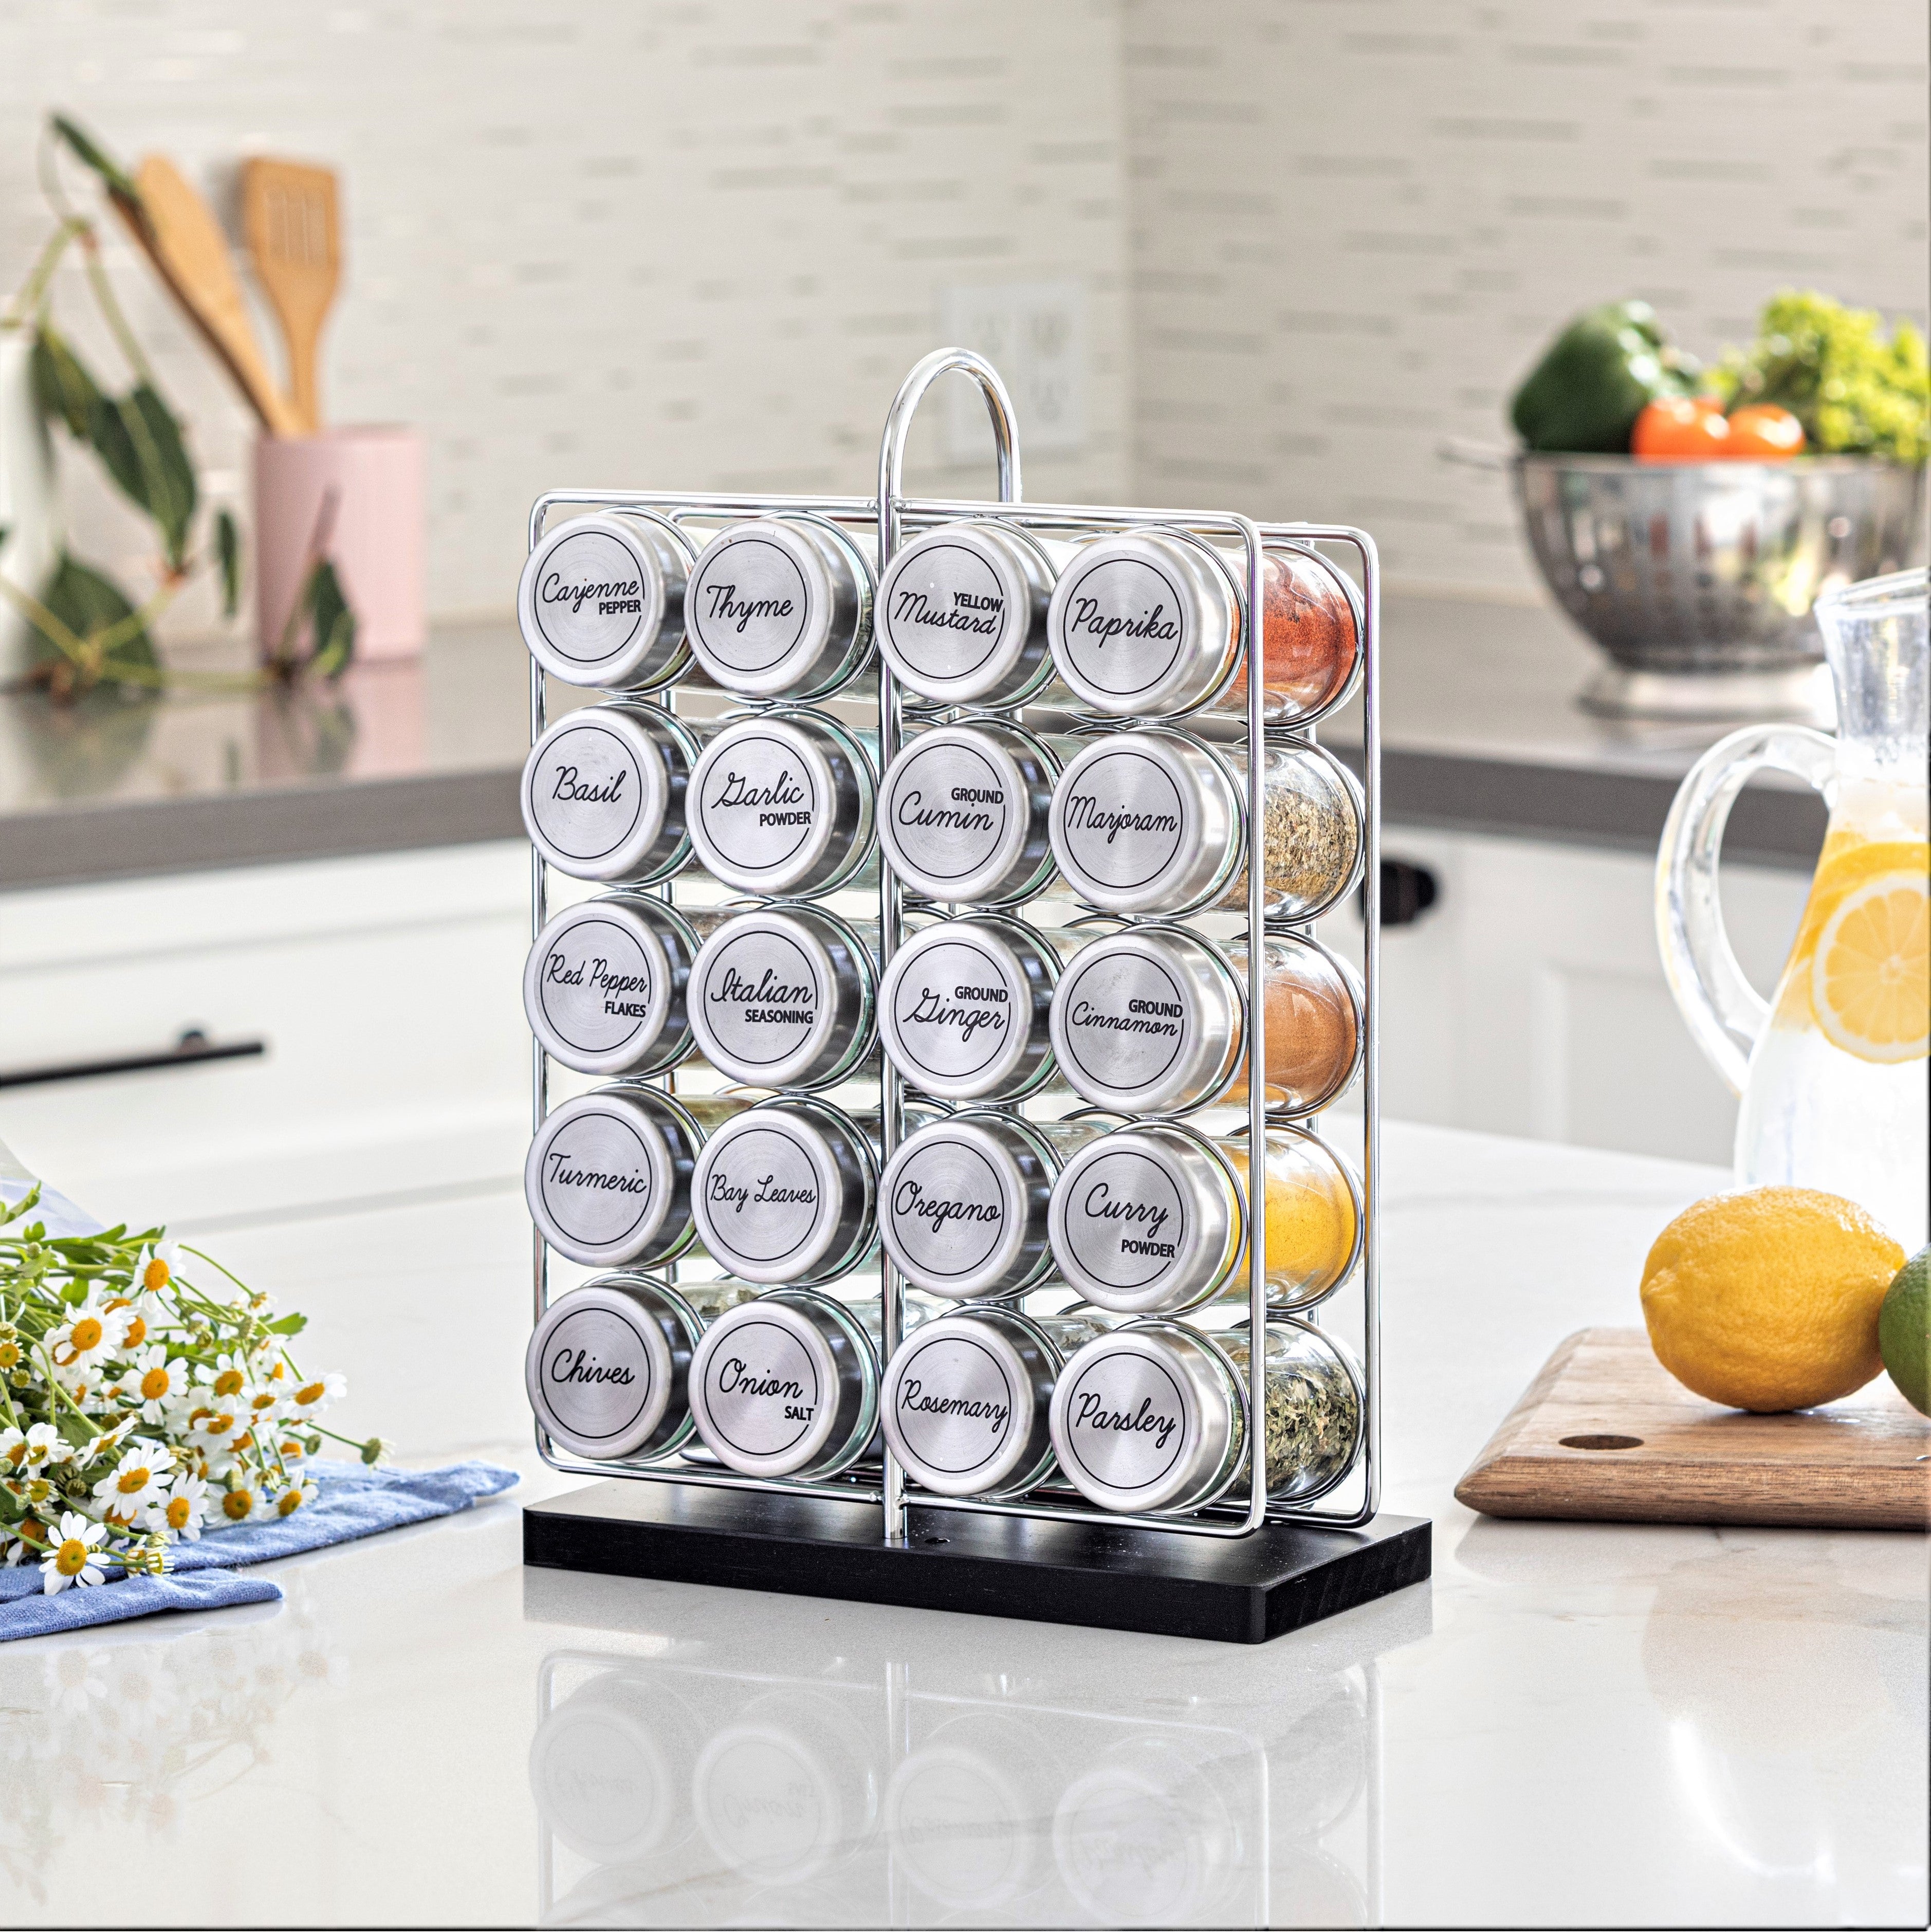 Orii 20 Jar Bamboo Spice Rack with Spices Included - Rotating Tower  Organizer for Kitchen Spices and Seasonings, Free Spice Refills for 5 Years